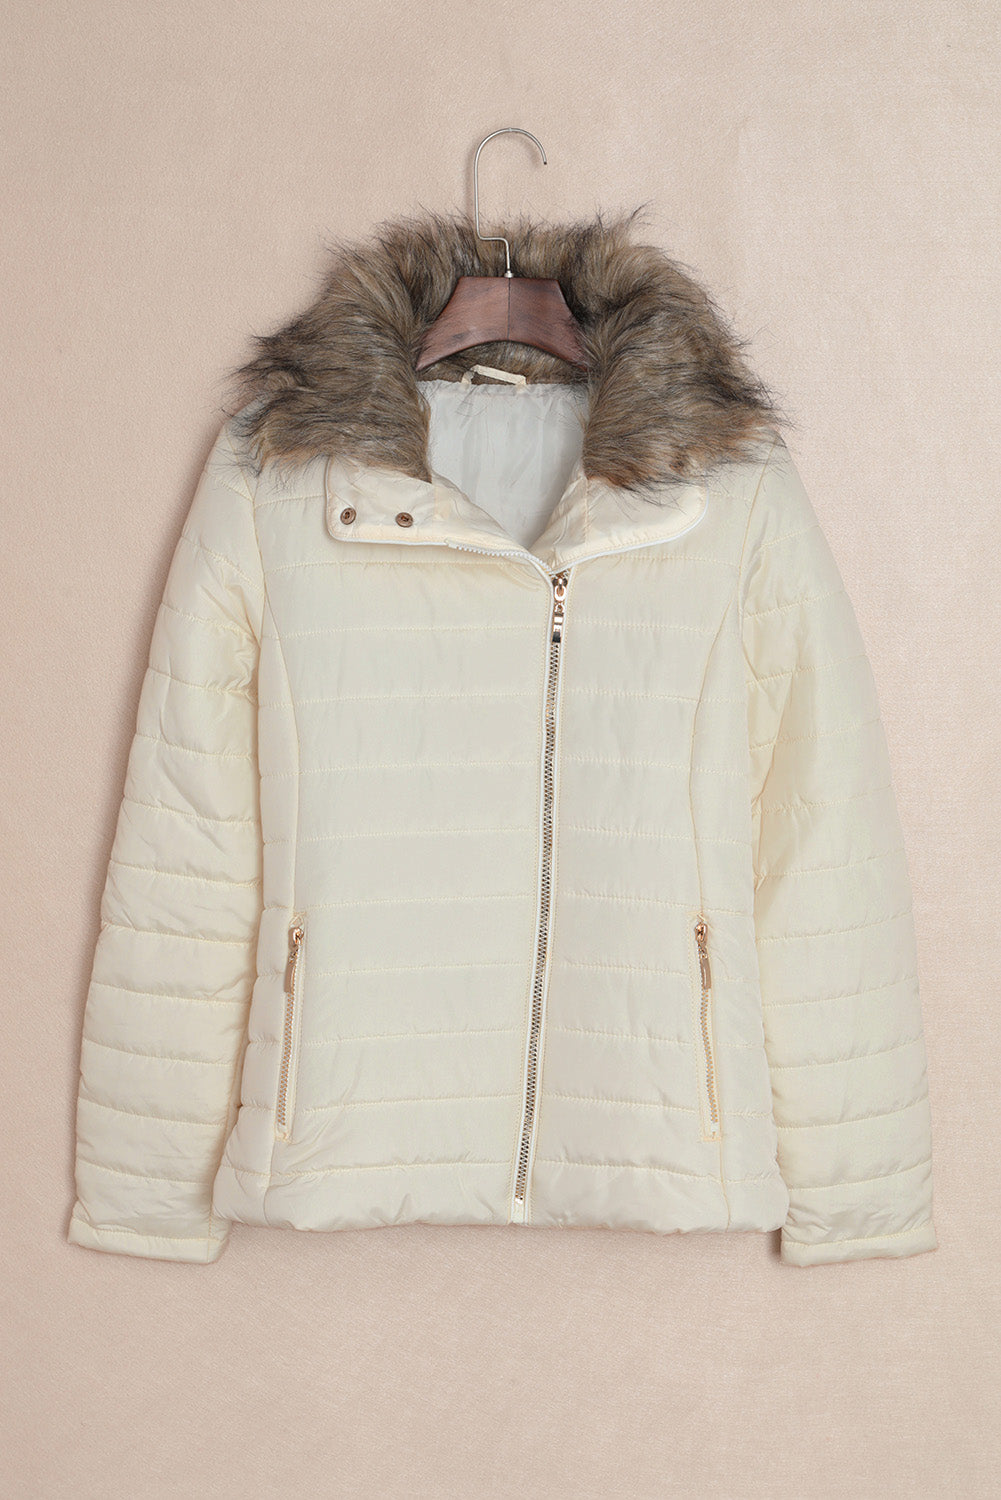 LC85117-15-XXL, LC85117-15-XL, LC85117-15-L, LC85117-15-M, LC85117-15-S, LC85117-15-2XL, Beige Winter Coats for Women Camel Faux Fur Collar Trim Black Quilted Jacket Outerwear